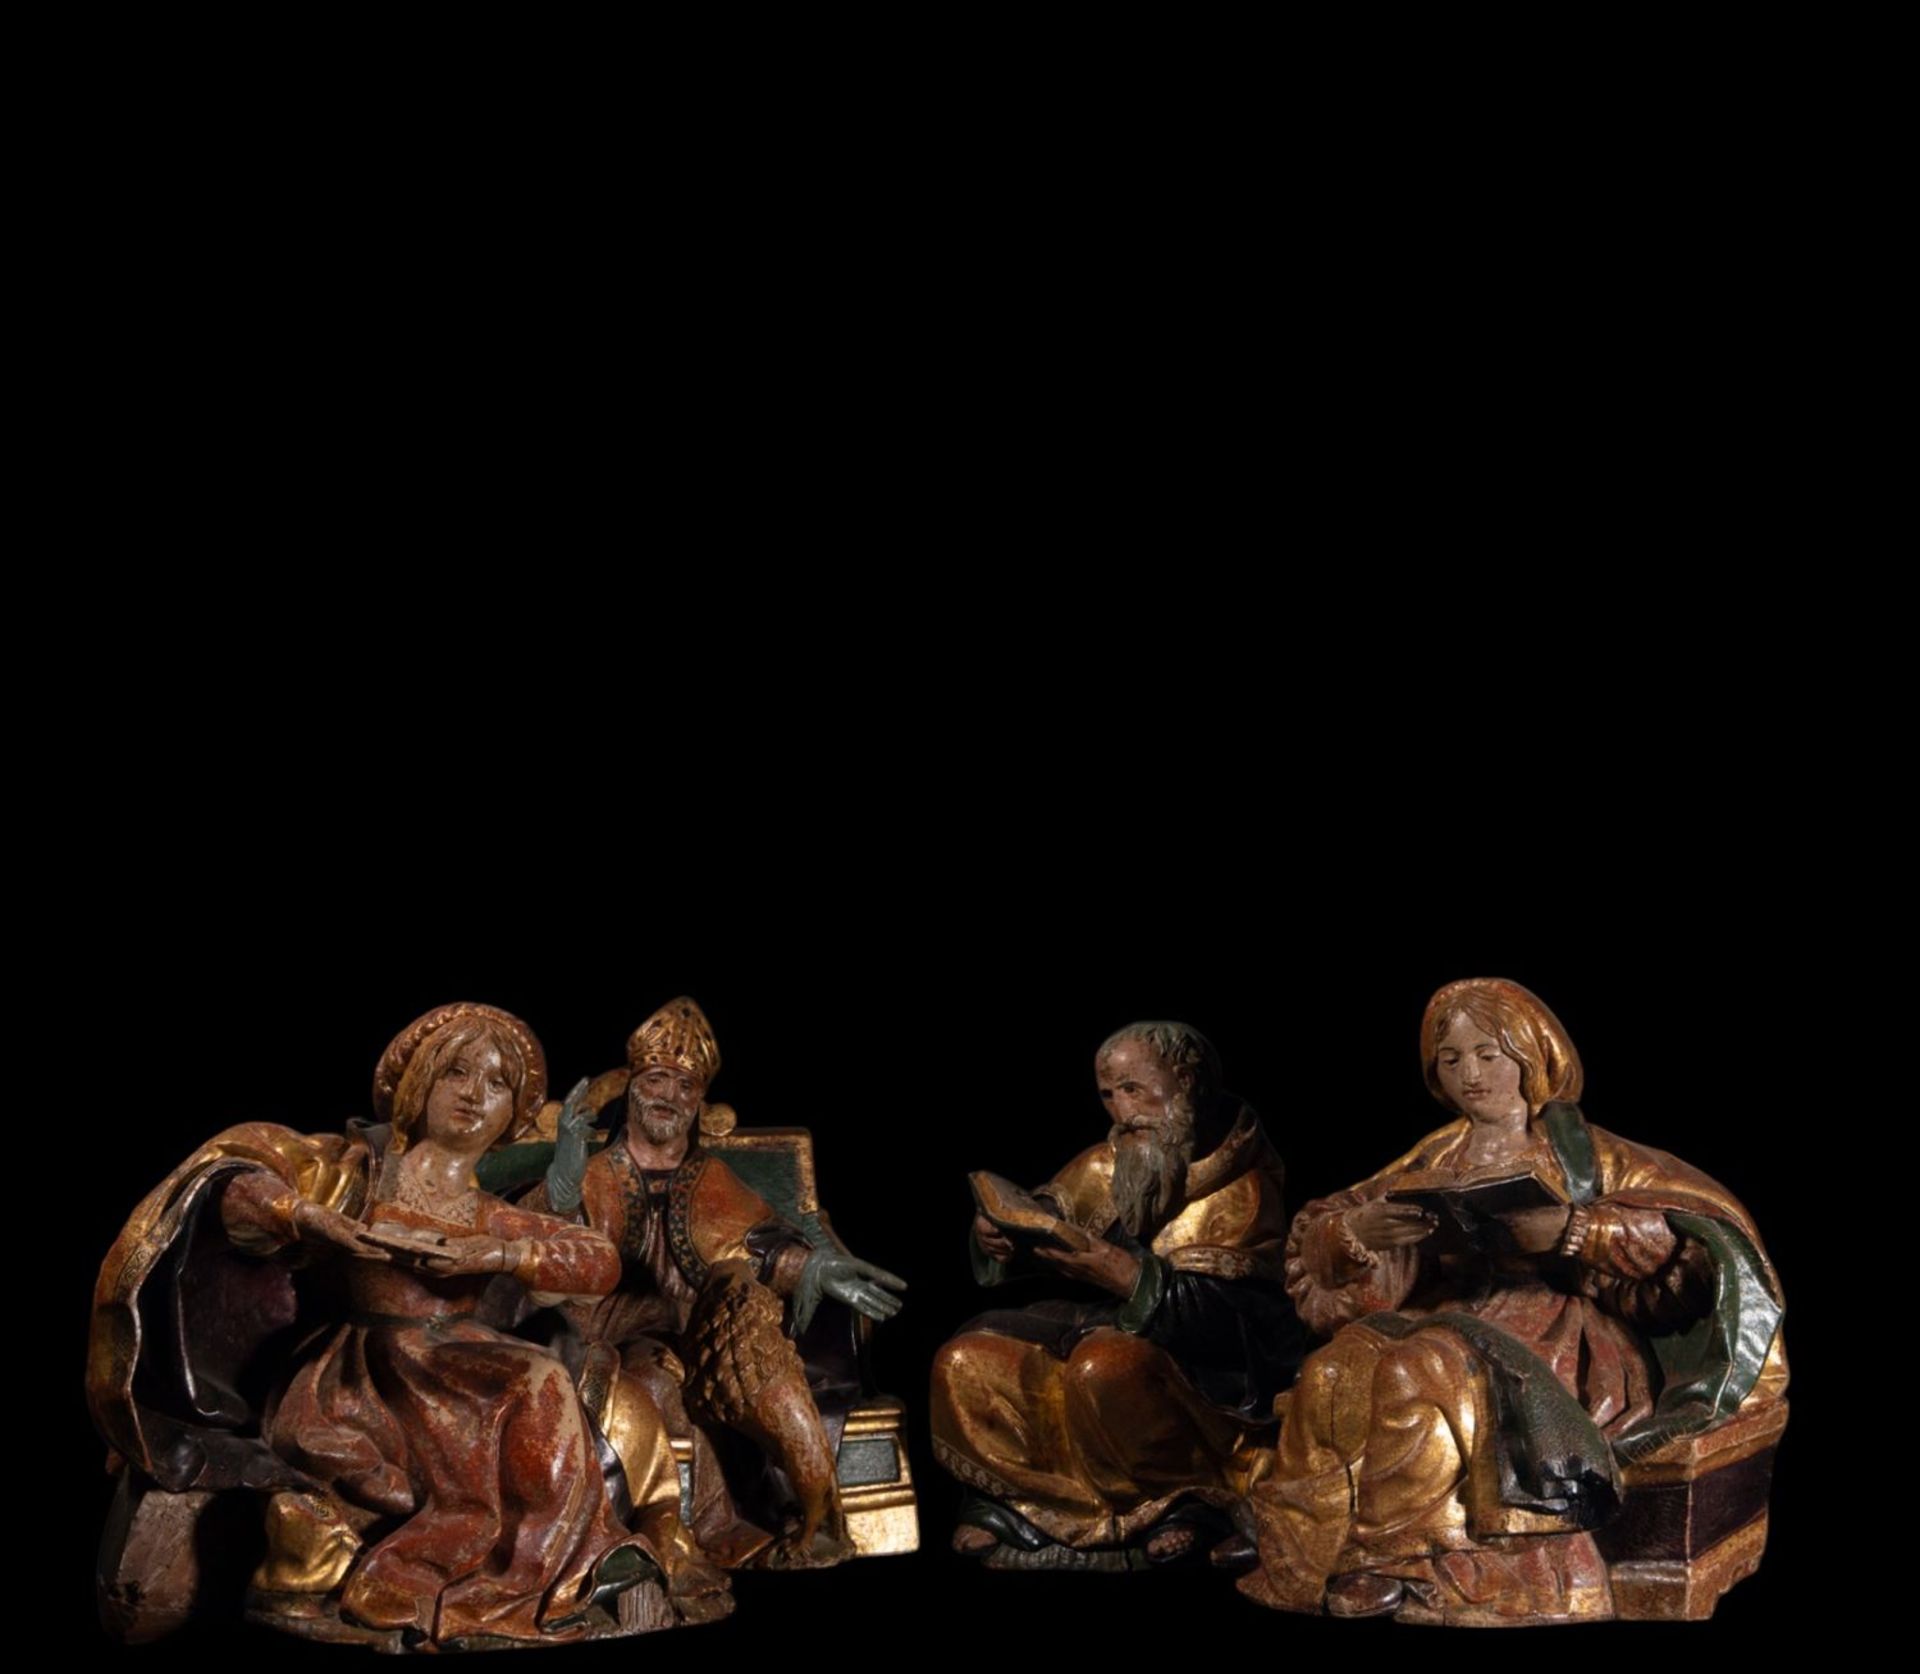 Spectacular lot of Four German Renaissance Carvings from the 16th century, possibly Rhine Valley lat